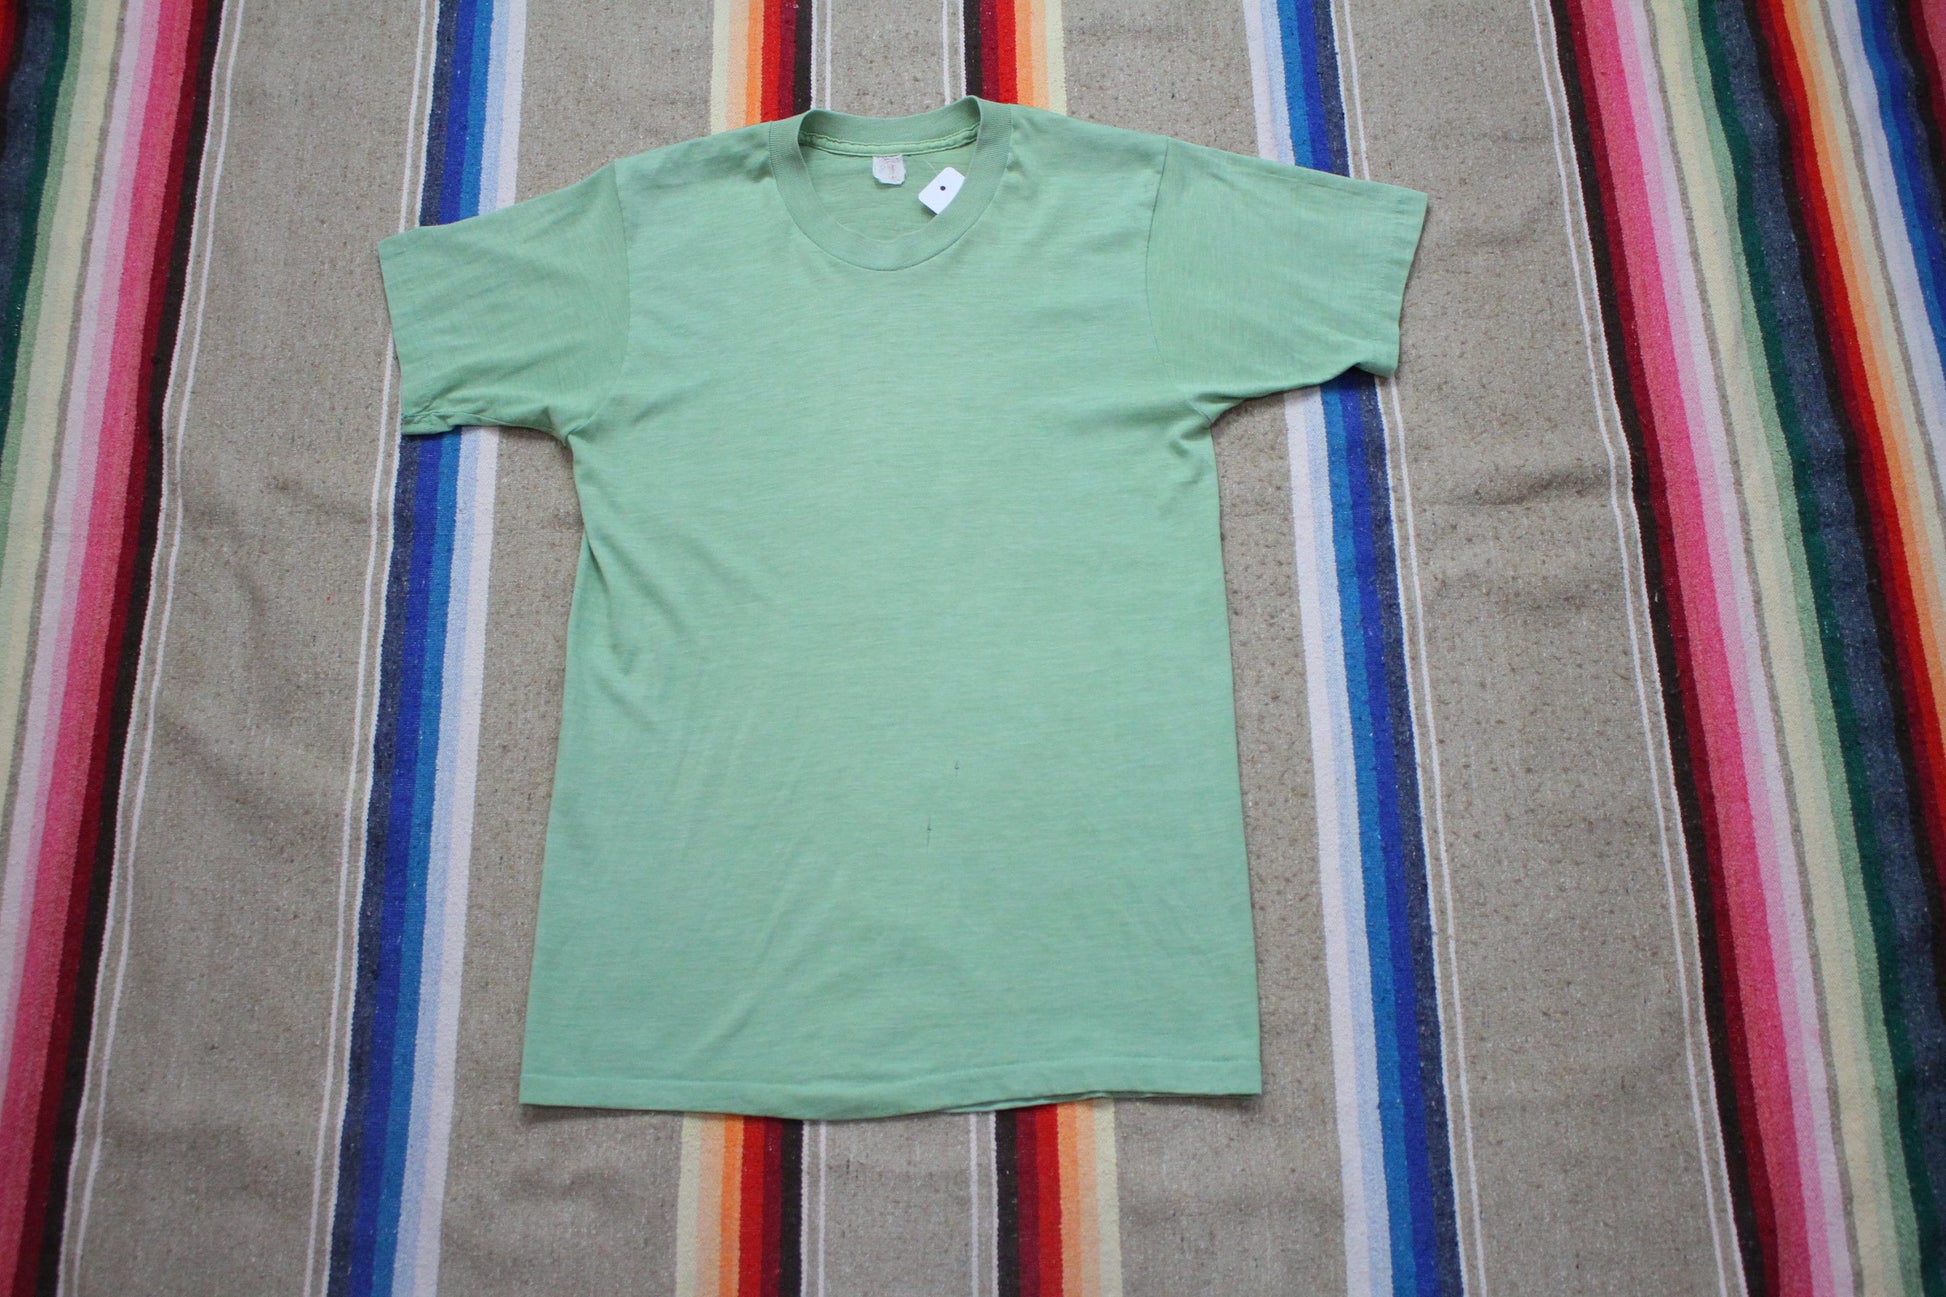 1980s Fruit of the Loom Golden Blend Blank Green T-Shirt Made in USA Size S